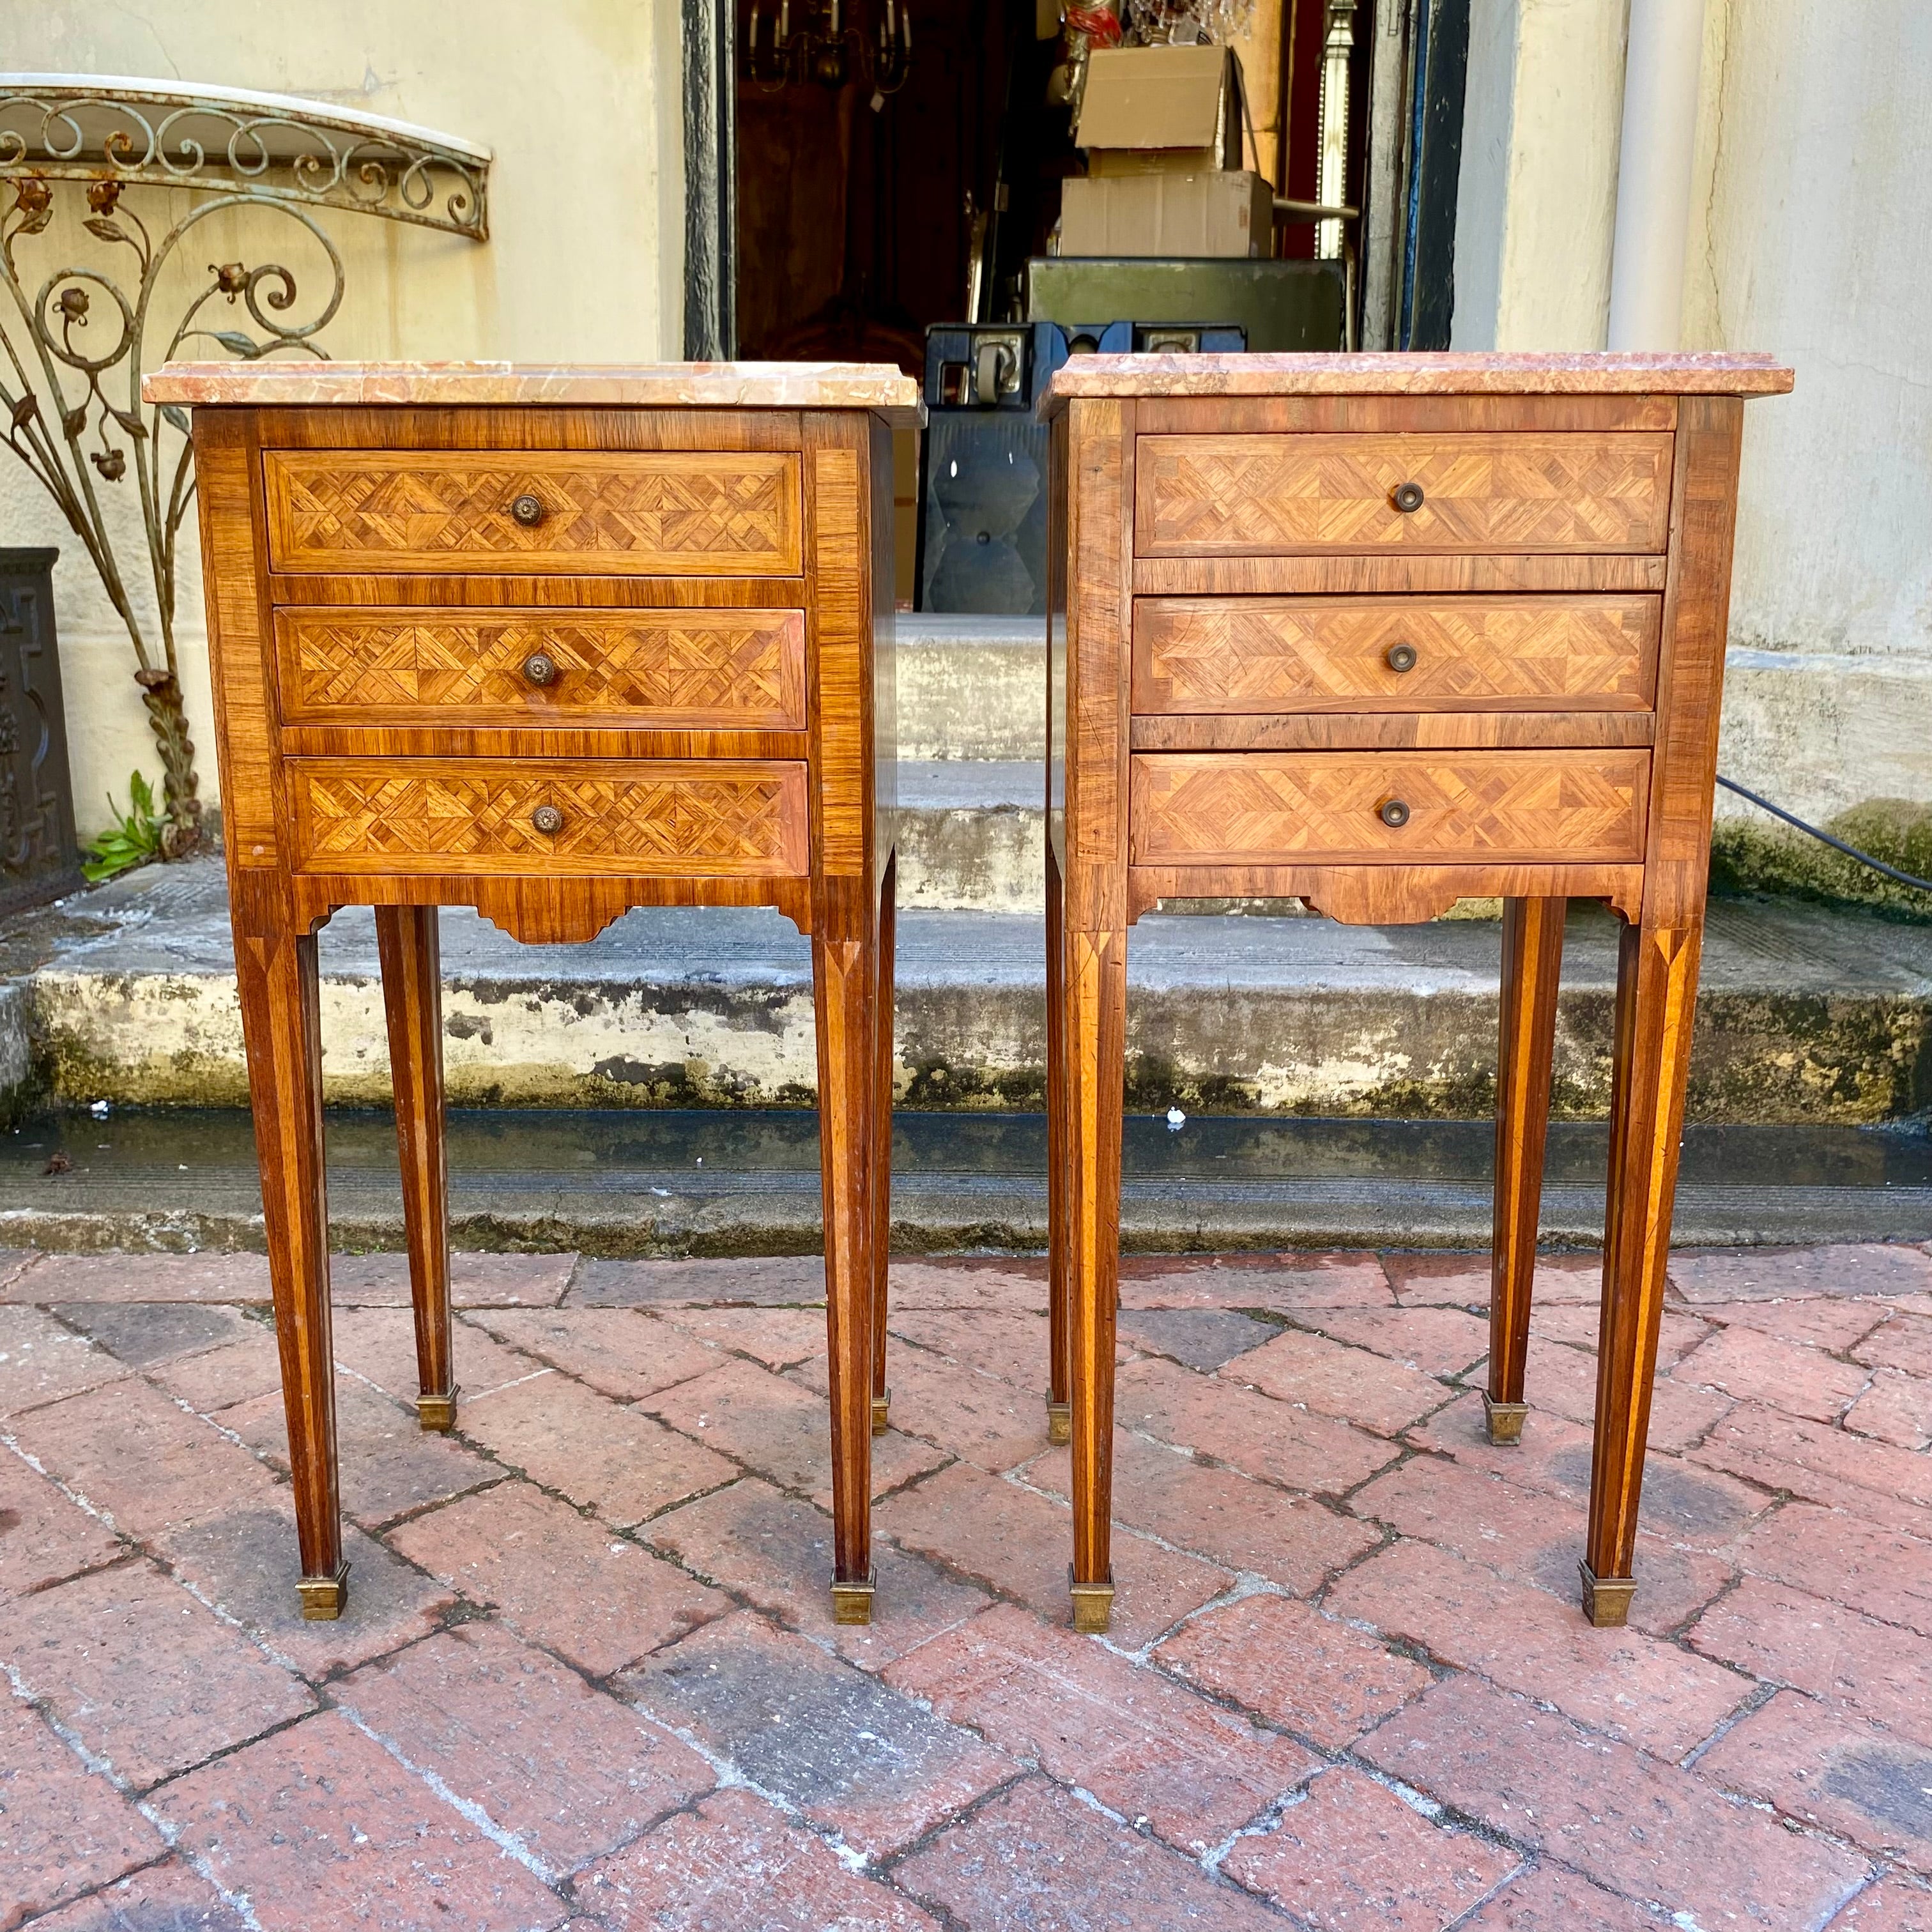 Pair of Antique French Cherry Wood Pedestals